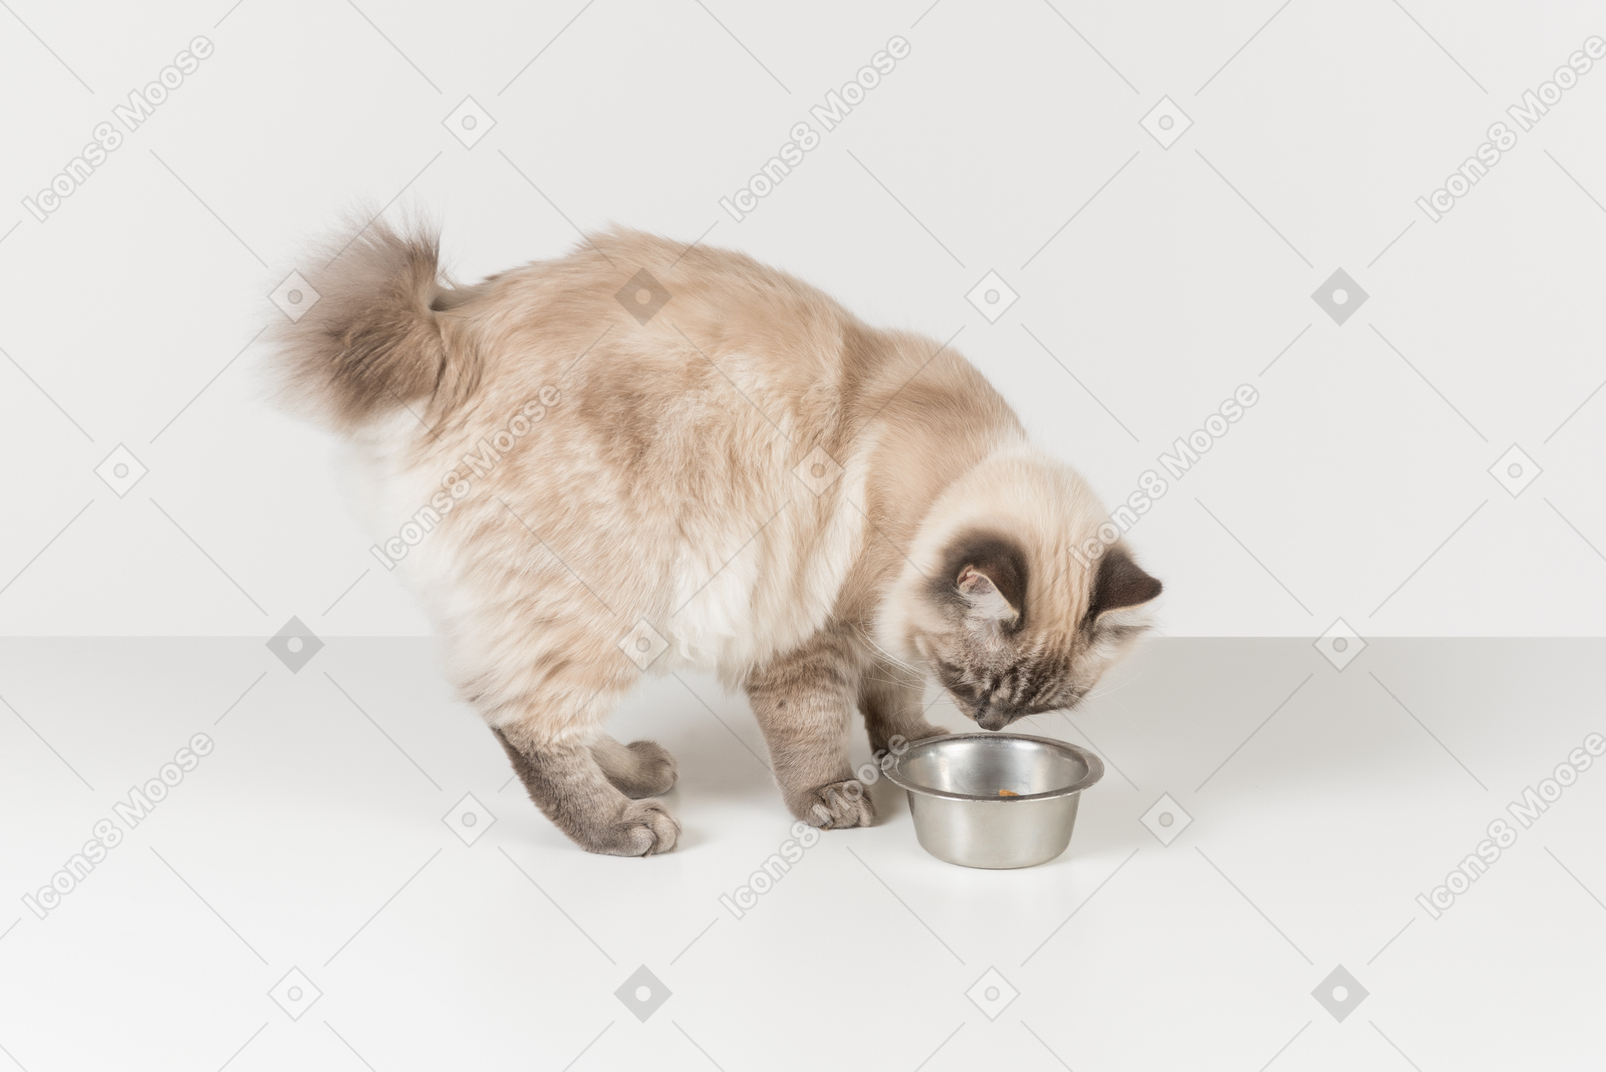 White-brownish ragdoll cat eating food out of the metal bowl, against a plain white background